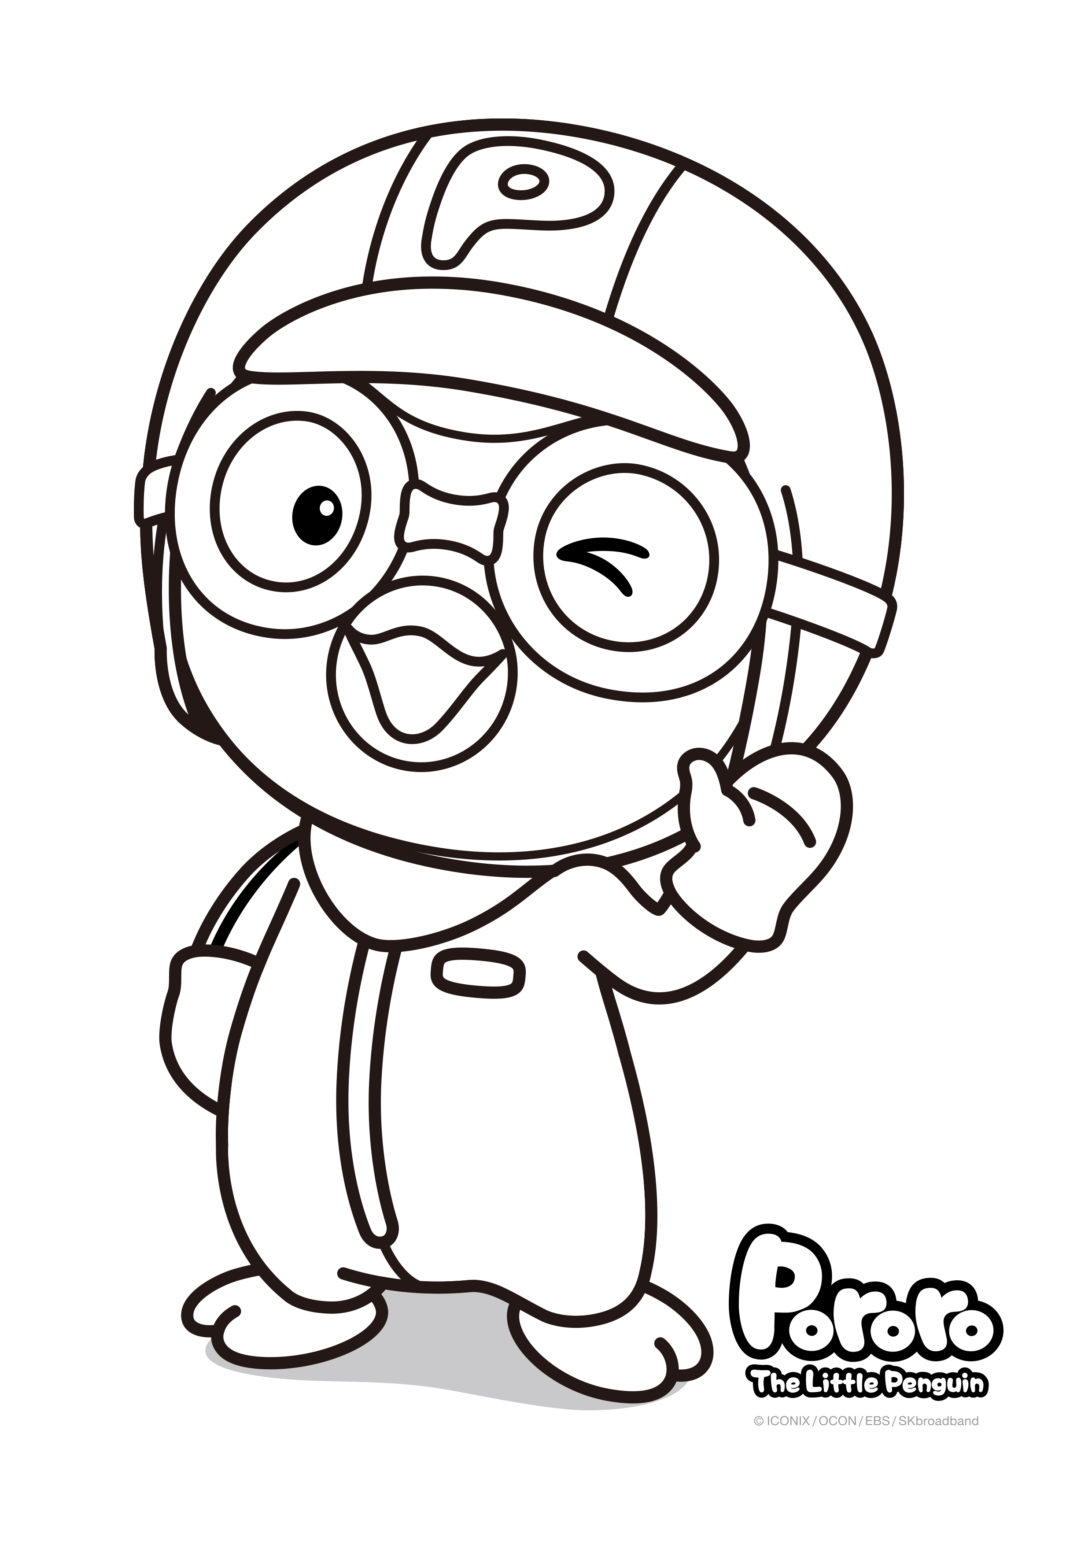 Pororo The Little Penguin Coloring Pages - Coloring Home